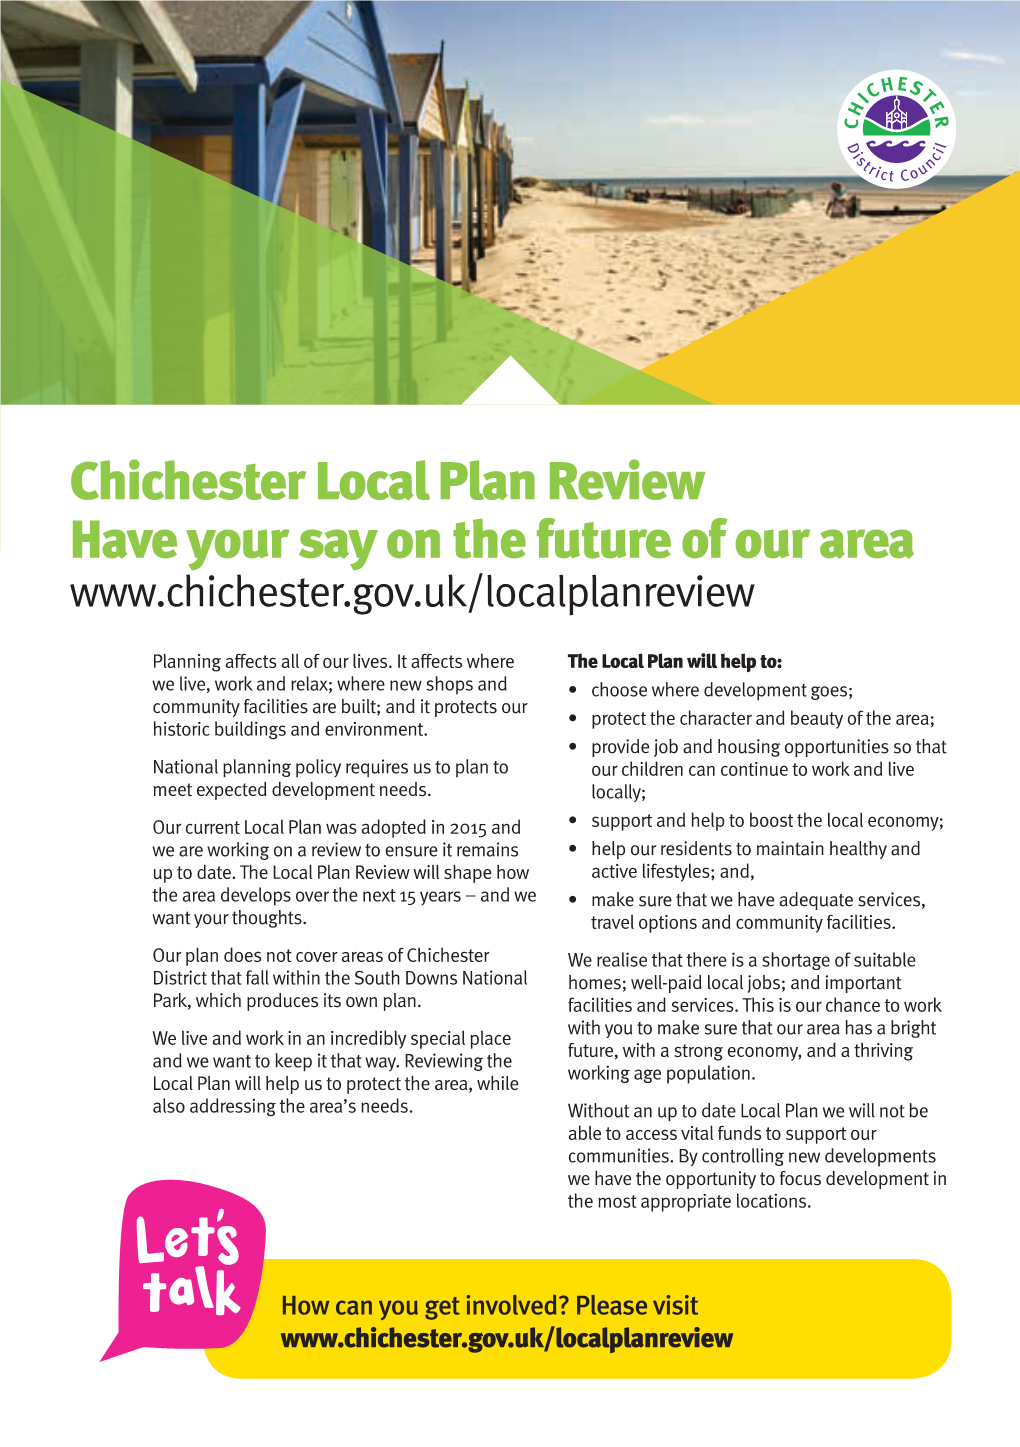 Chichester Local Plan Review Have Your Say on the Future of Our Area